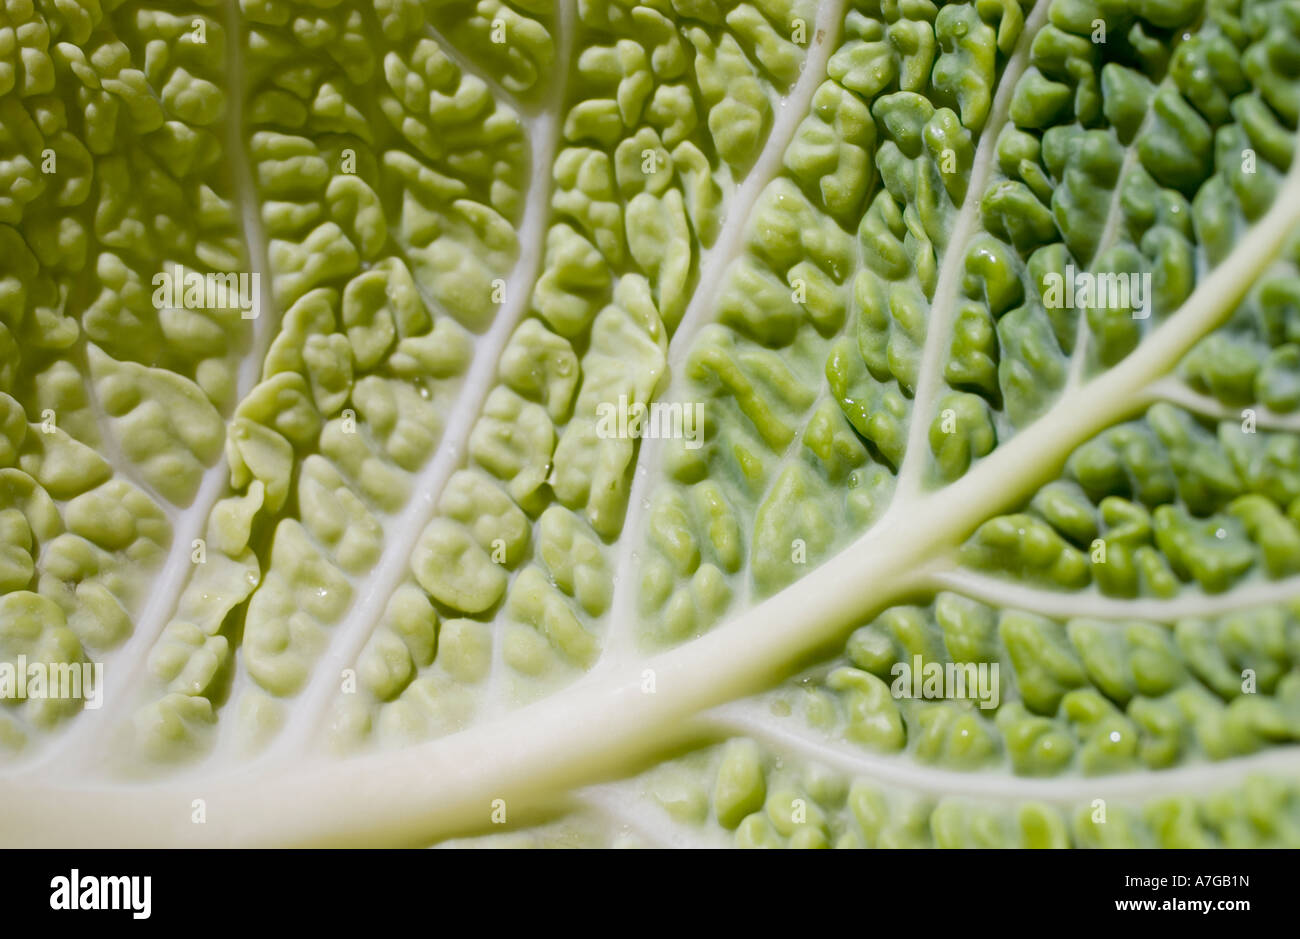 Close-up of leaf of Savoy Cabbage Stock Photo